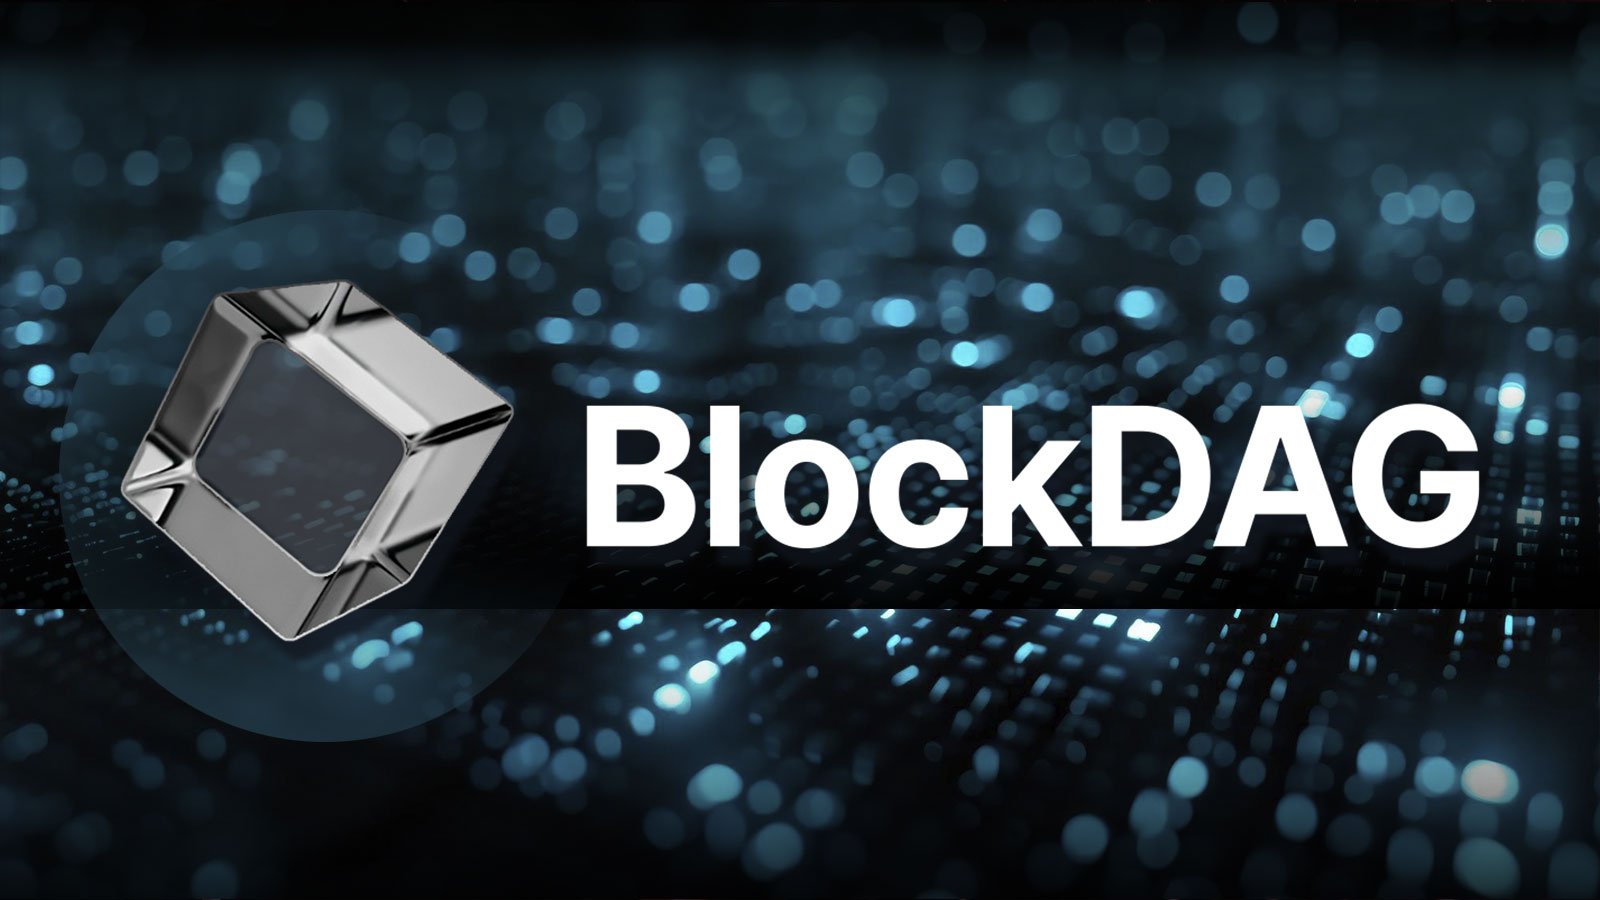 BlockDAG (BDAG) Asset Pre-Sale Might be Analyzed by Investors in April as Solana (SOL) and Dogecoin (DOGE) Large Altcoins Recovering